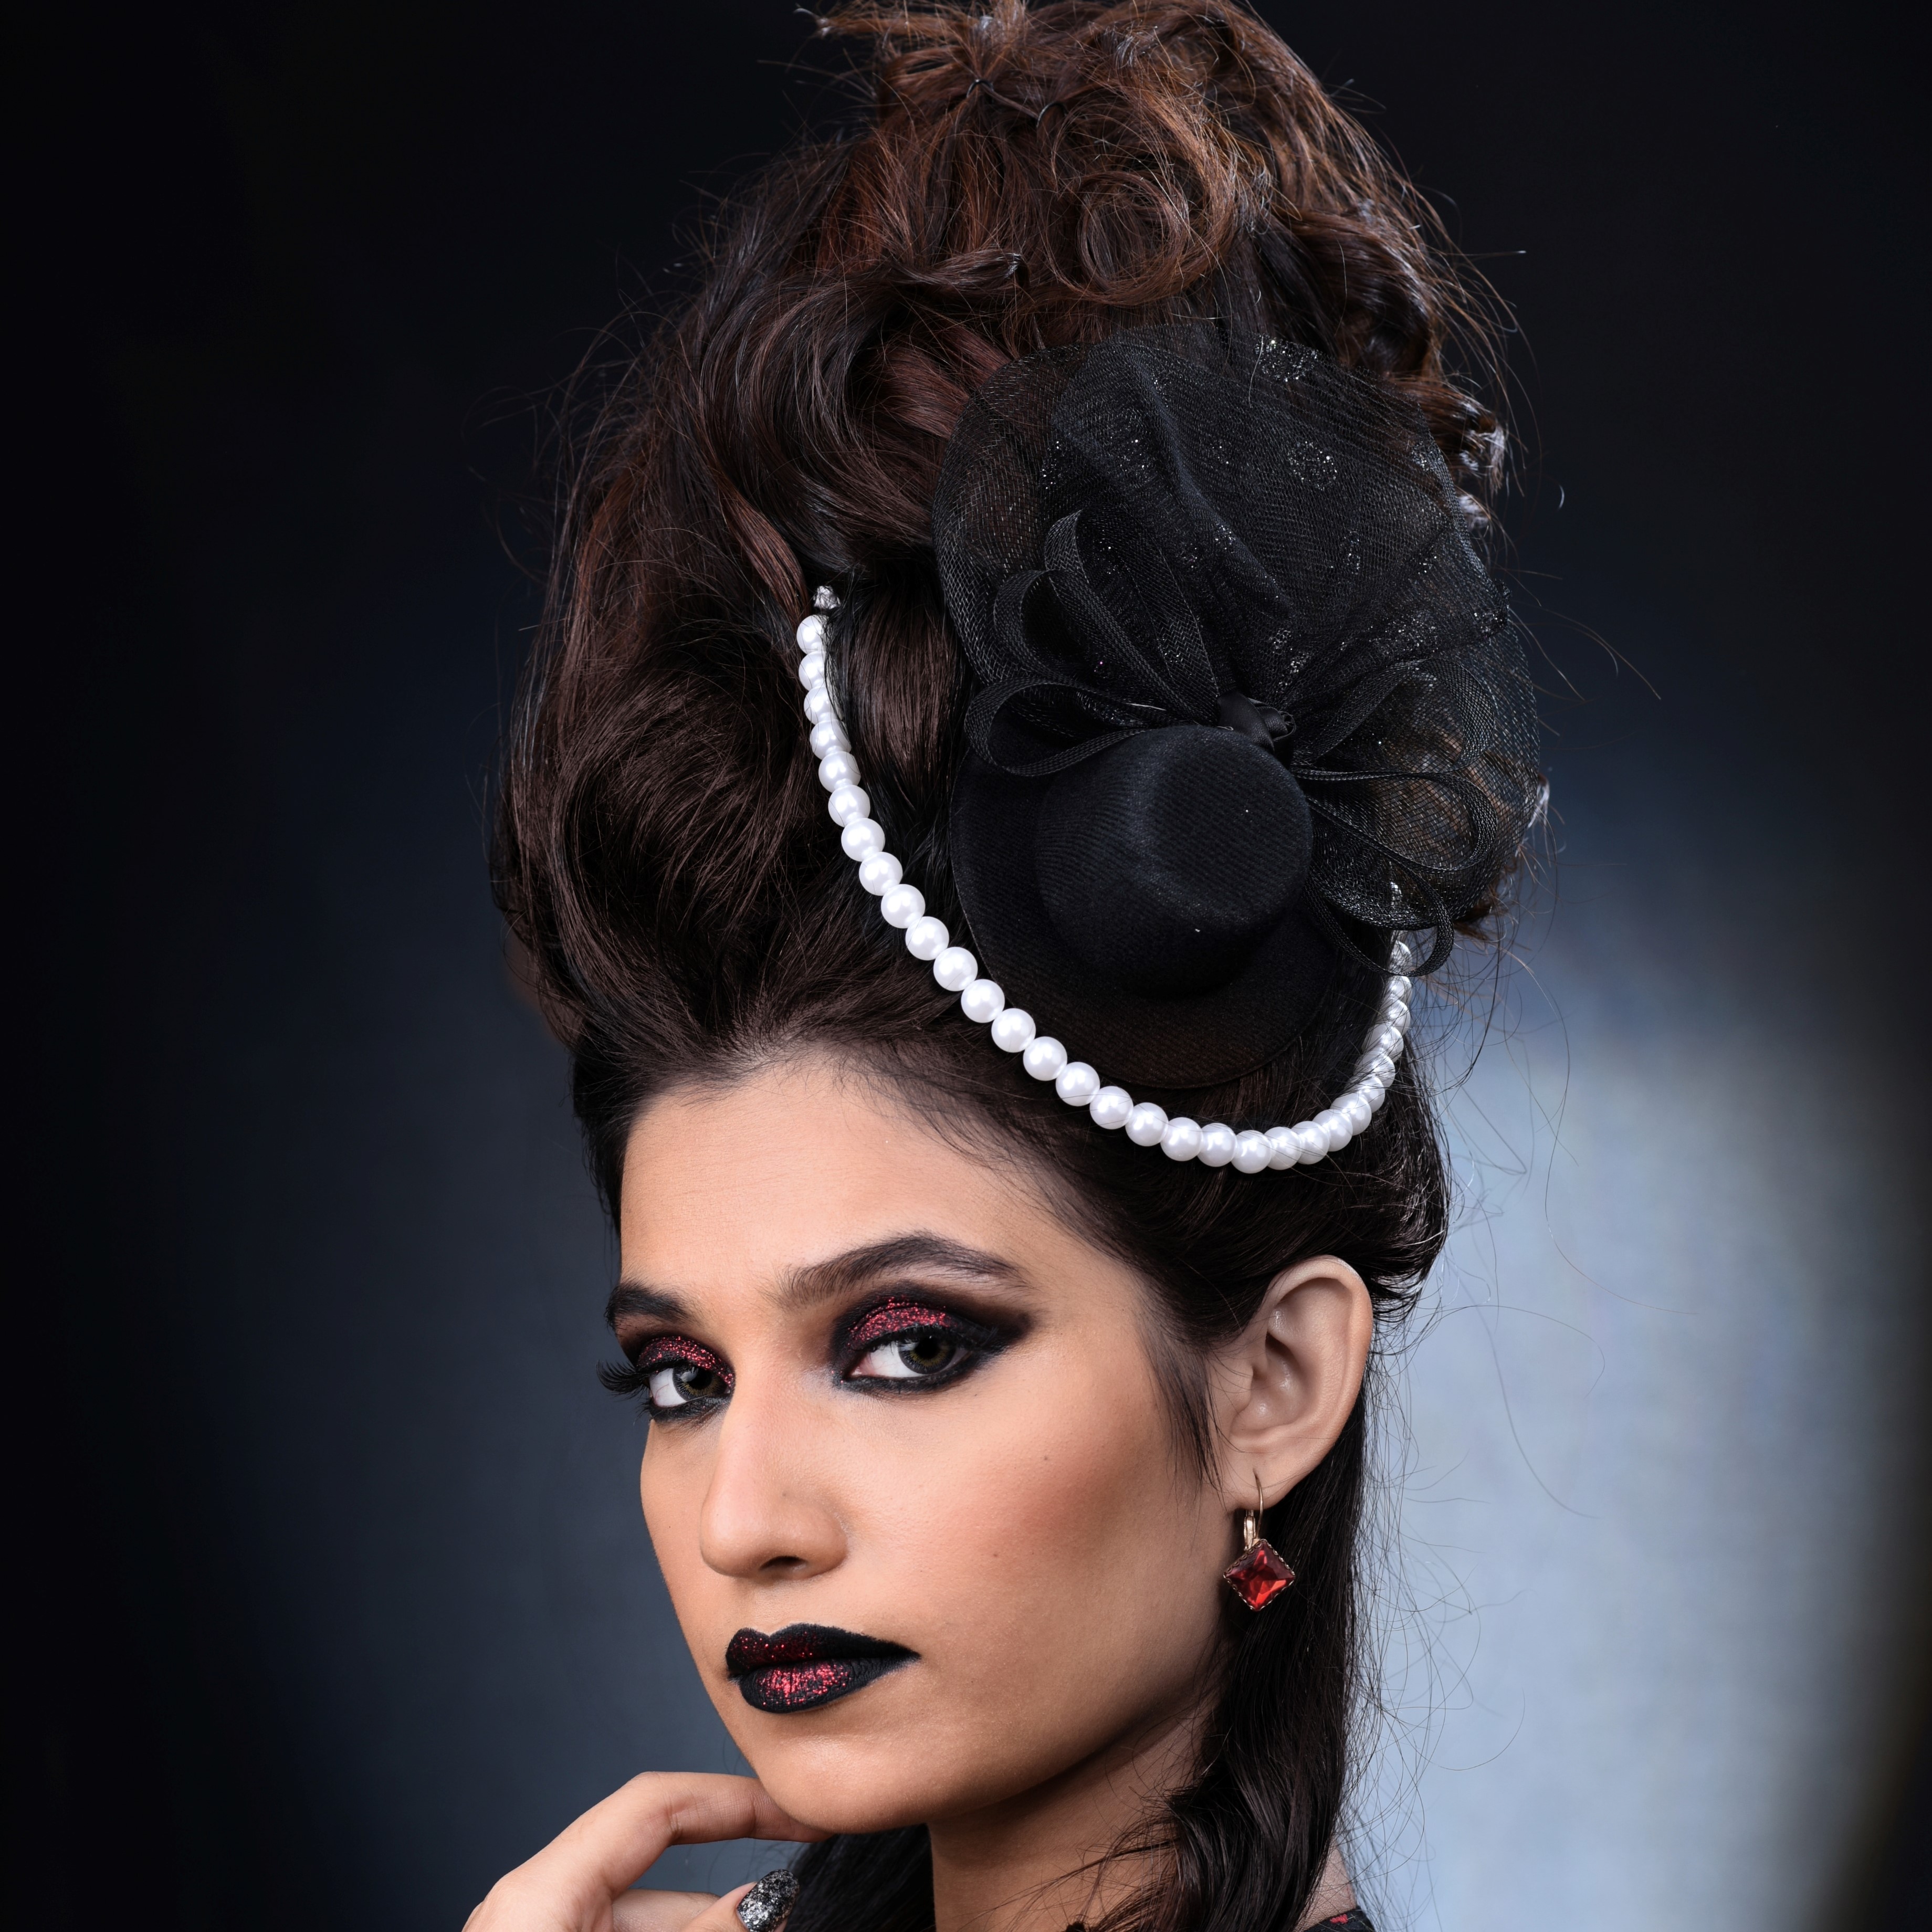 Vintage hairstyles which are a trend in 2022